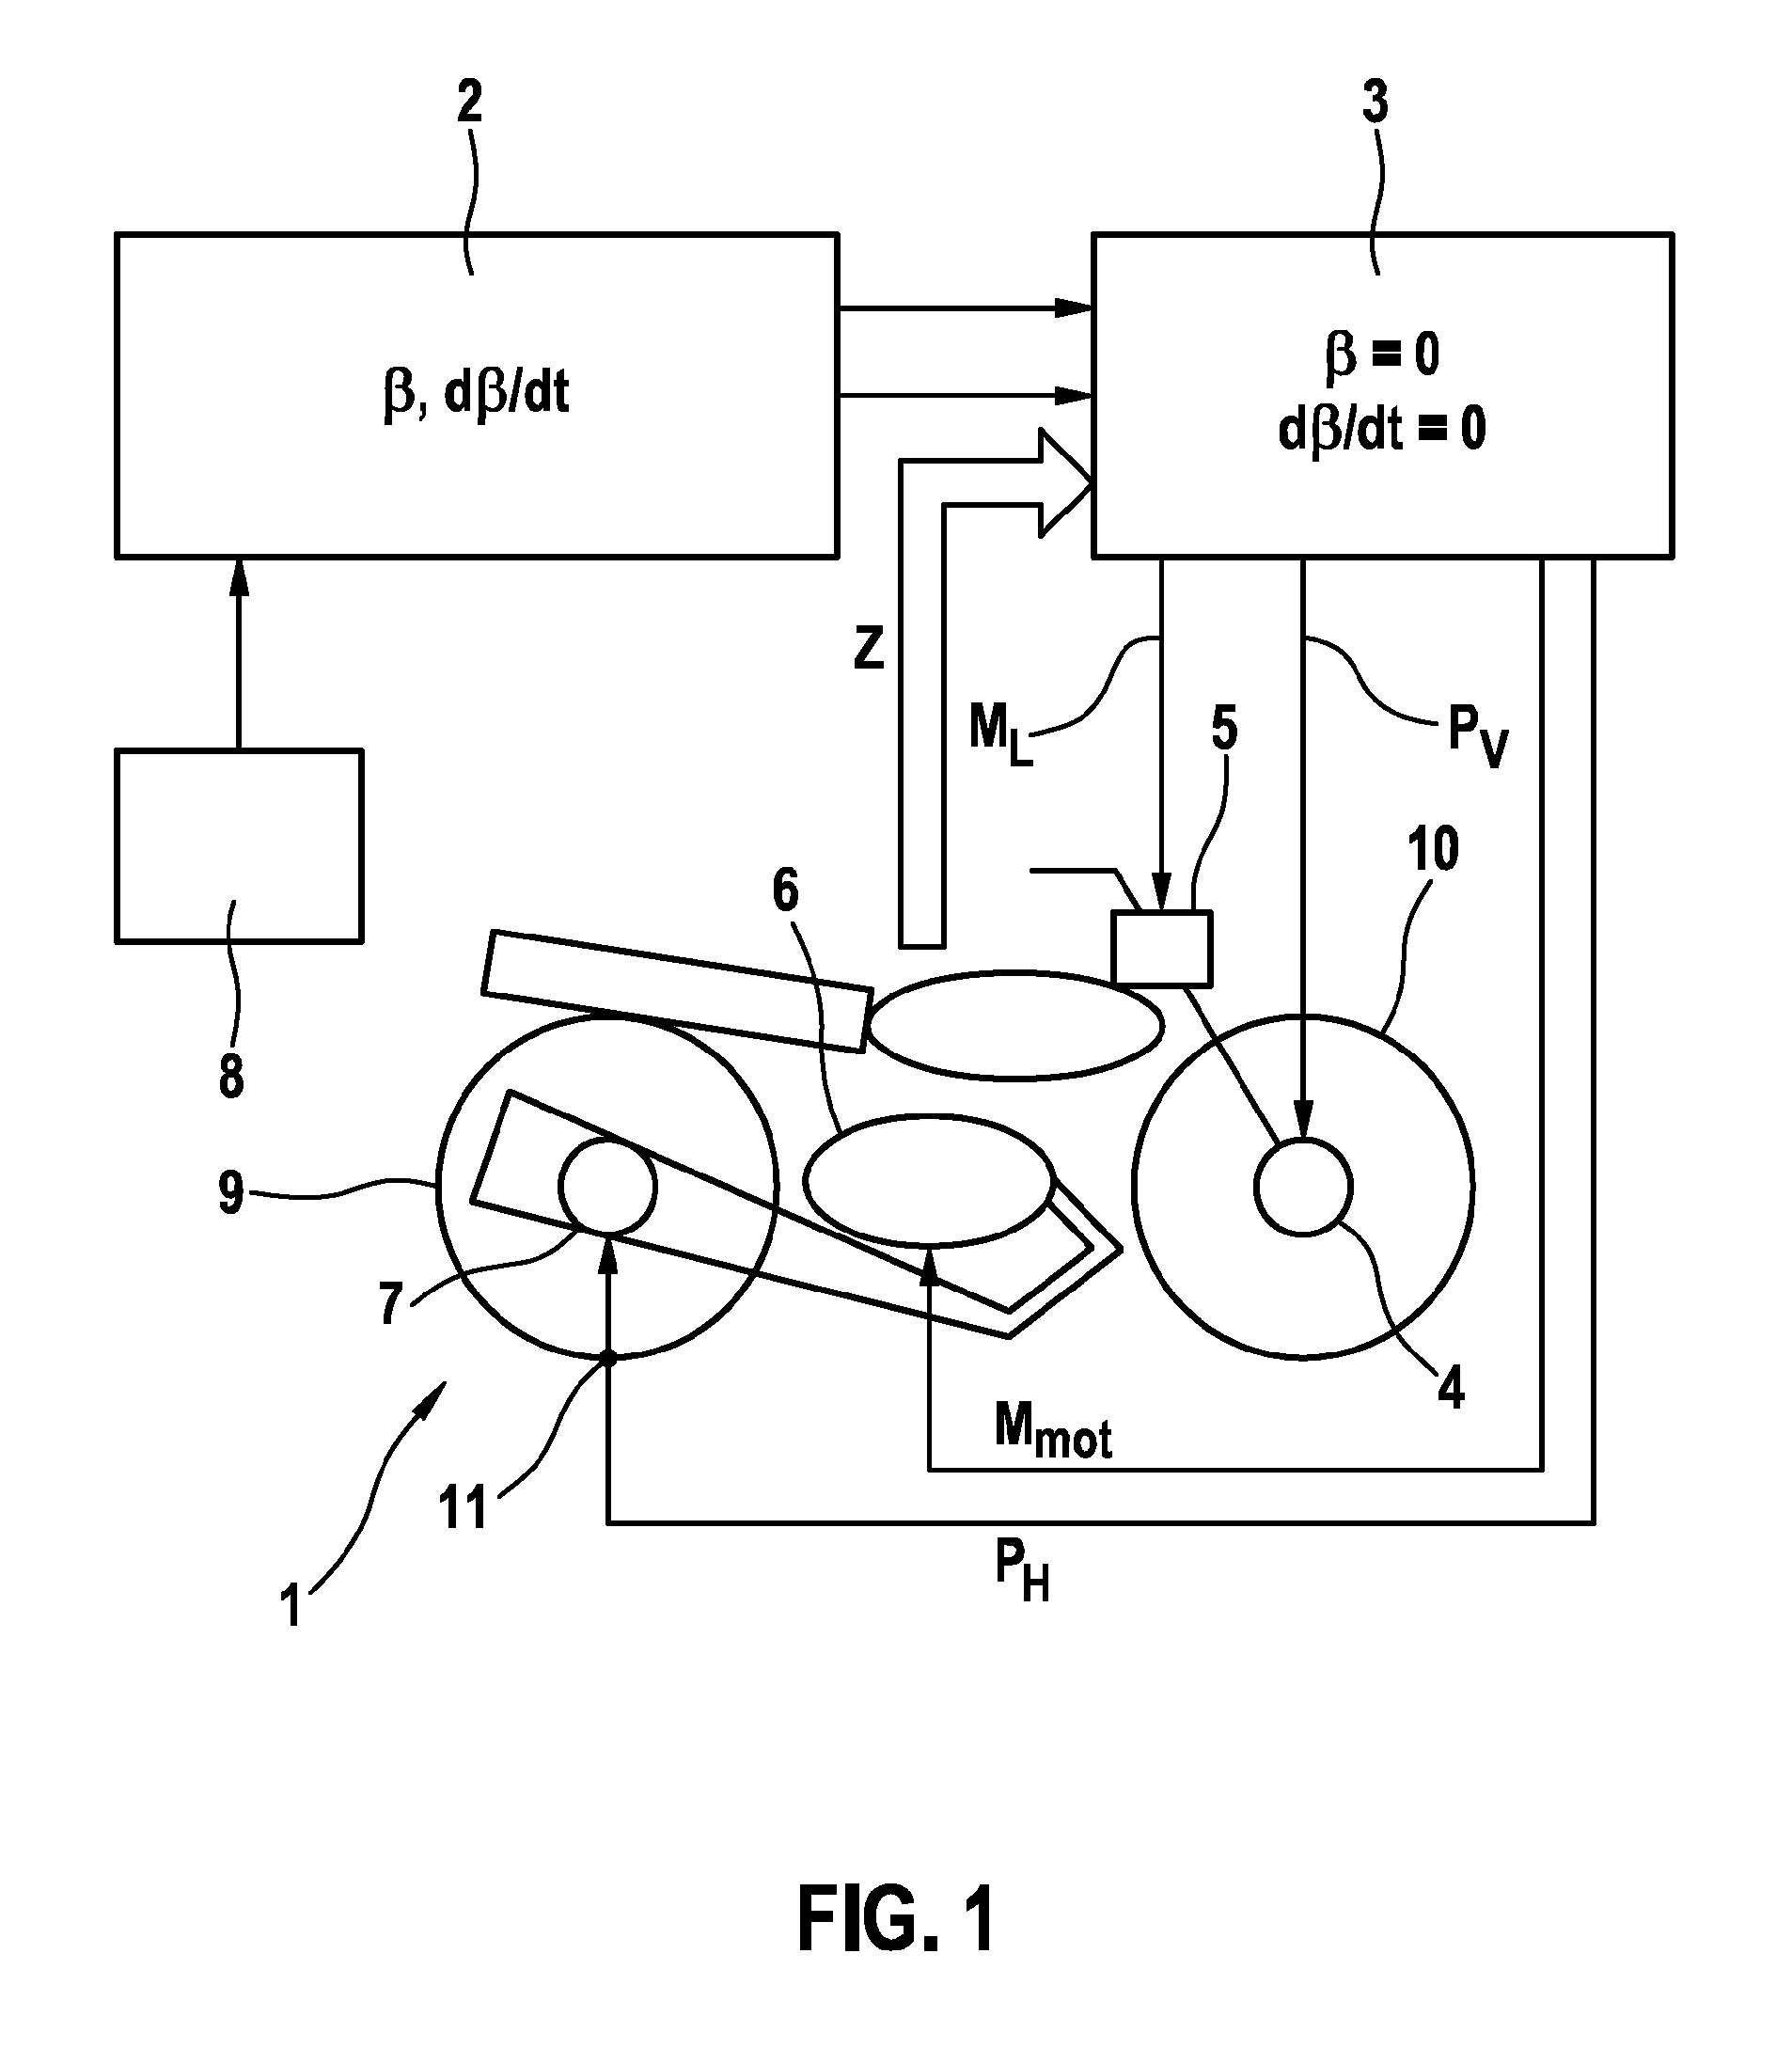 Method for stabilizing a two-wheeled vehicle having a laterally slipping rear wheel